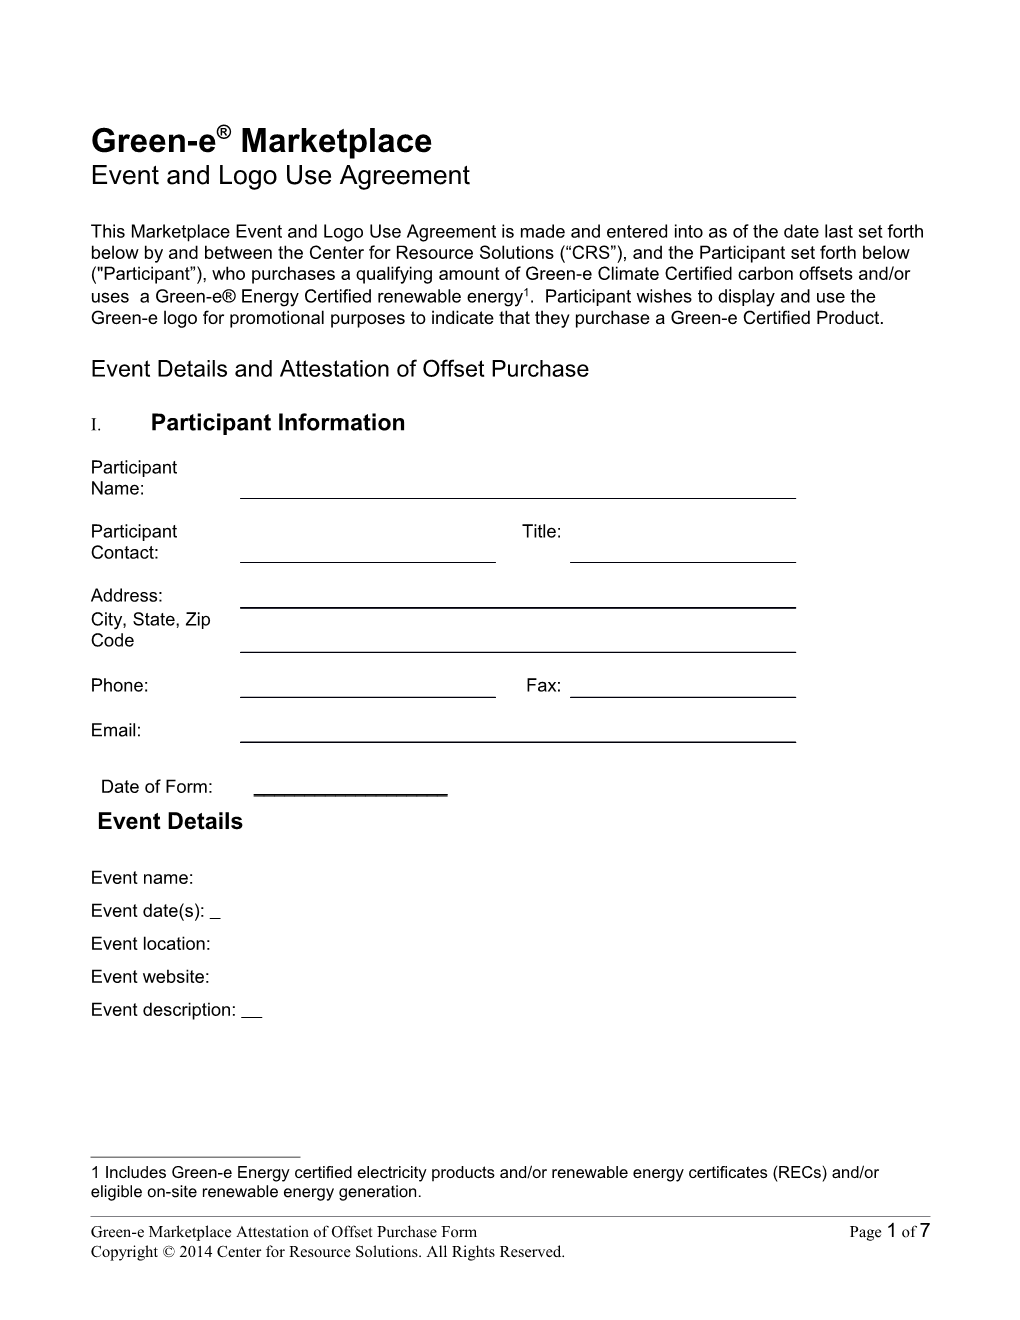 Event and Logo Use Agreement